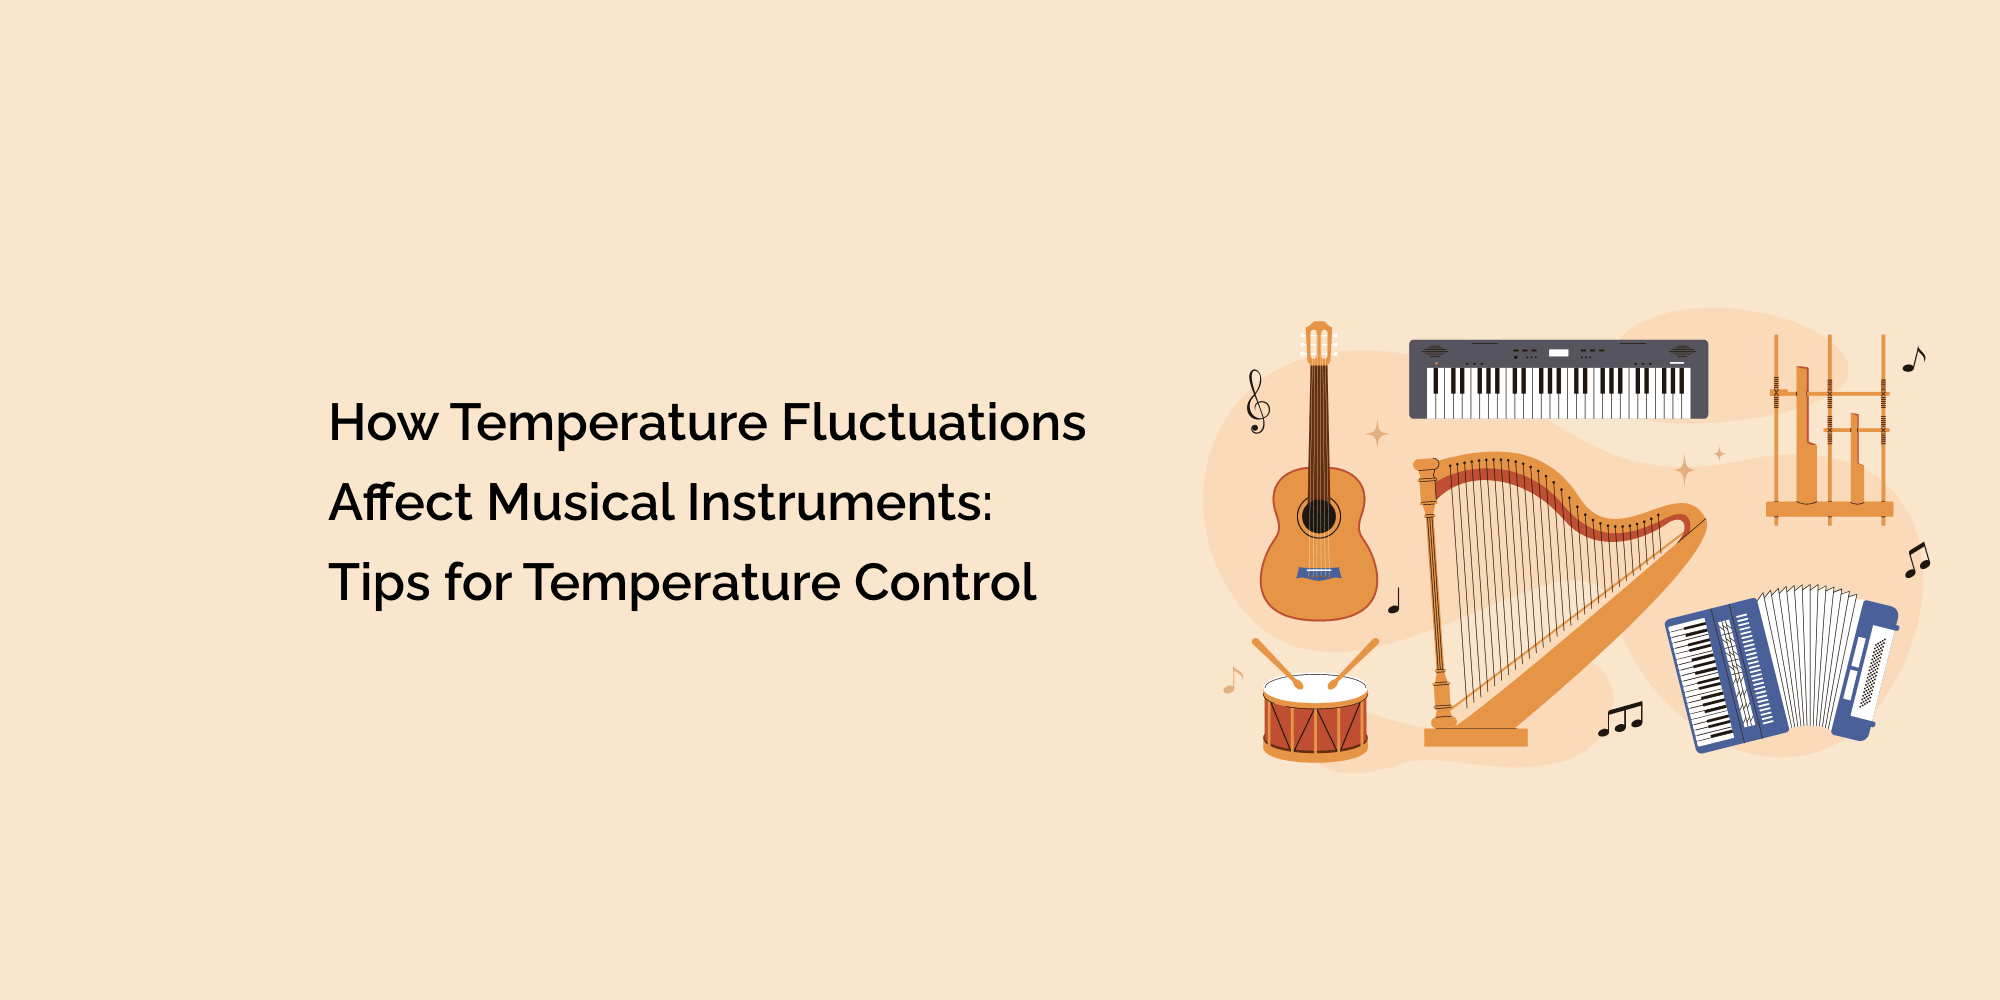 How Temperature Fluctuations Affect Musical Instruments: Tips for Temperature Control